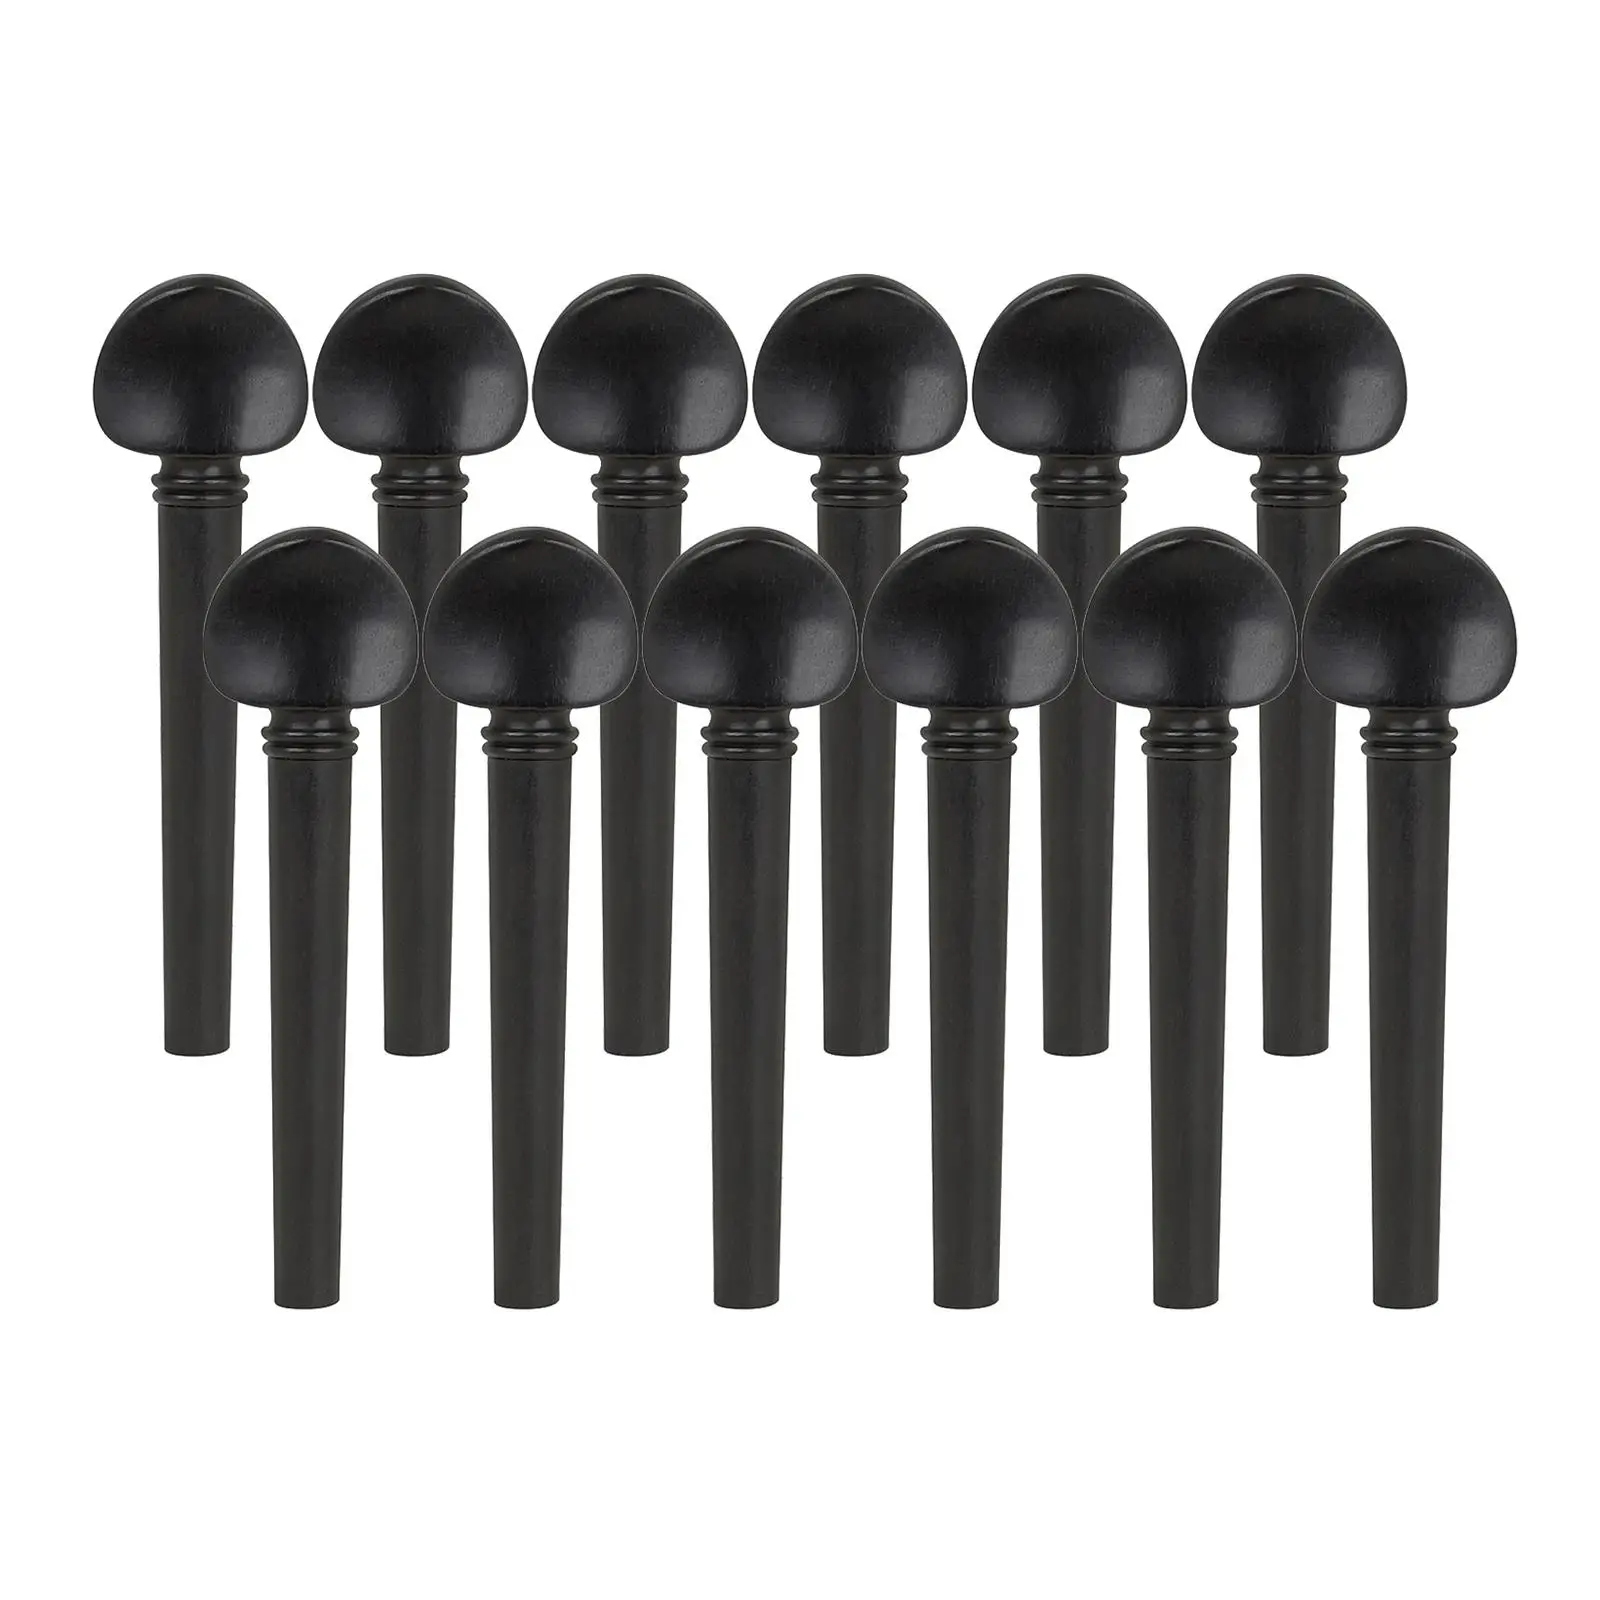 12 Pieces 3/4 4/4 Size Violin Tuning Pegs Fiddle Tuning Pegs Violin Accessories Replacement Parts